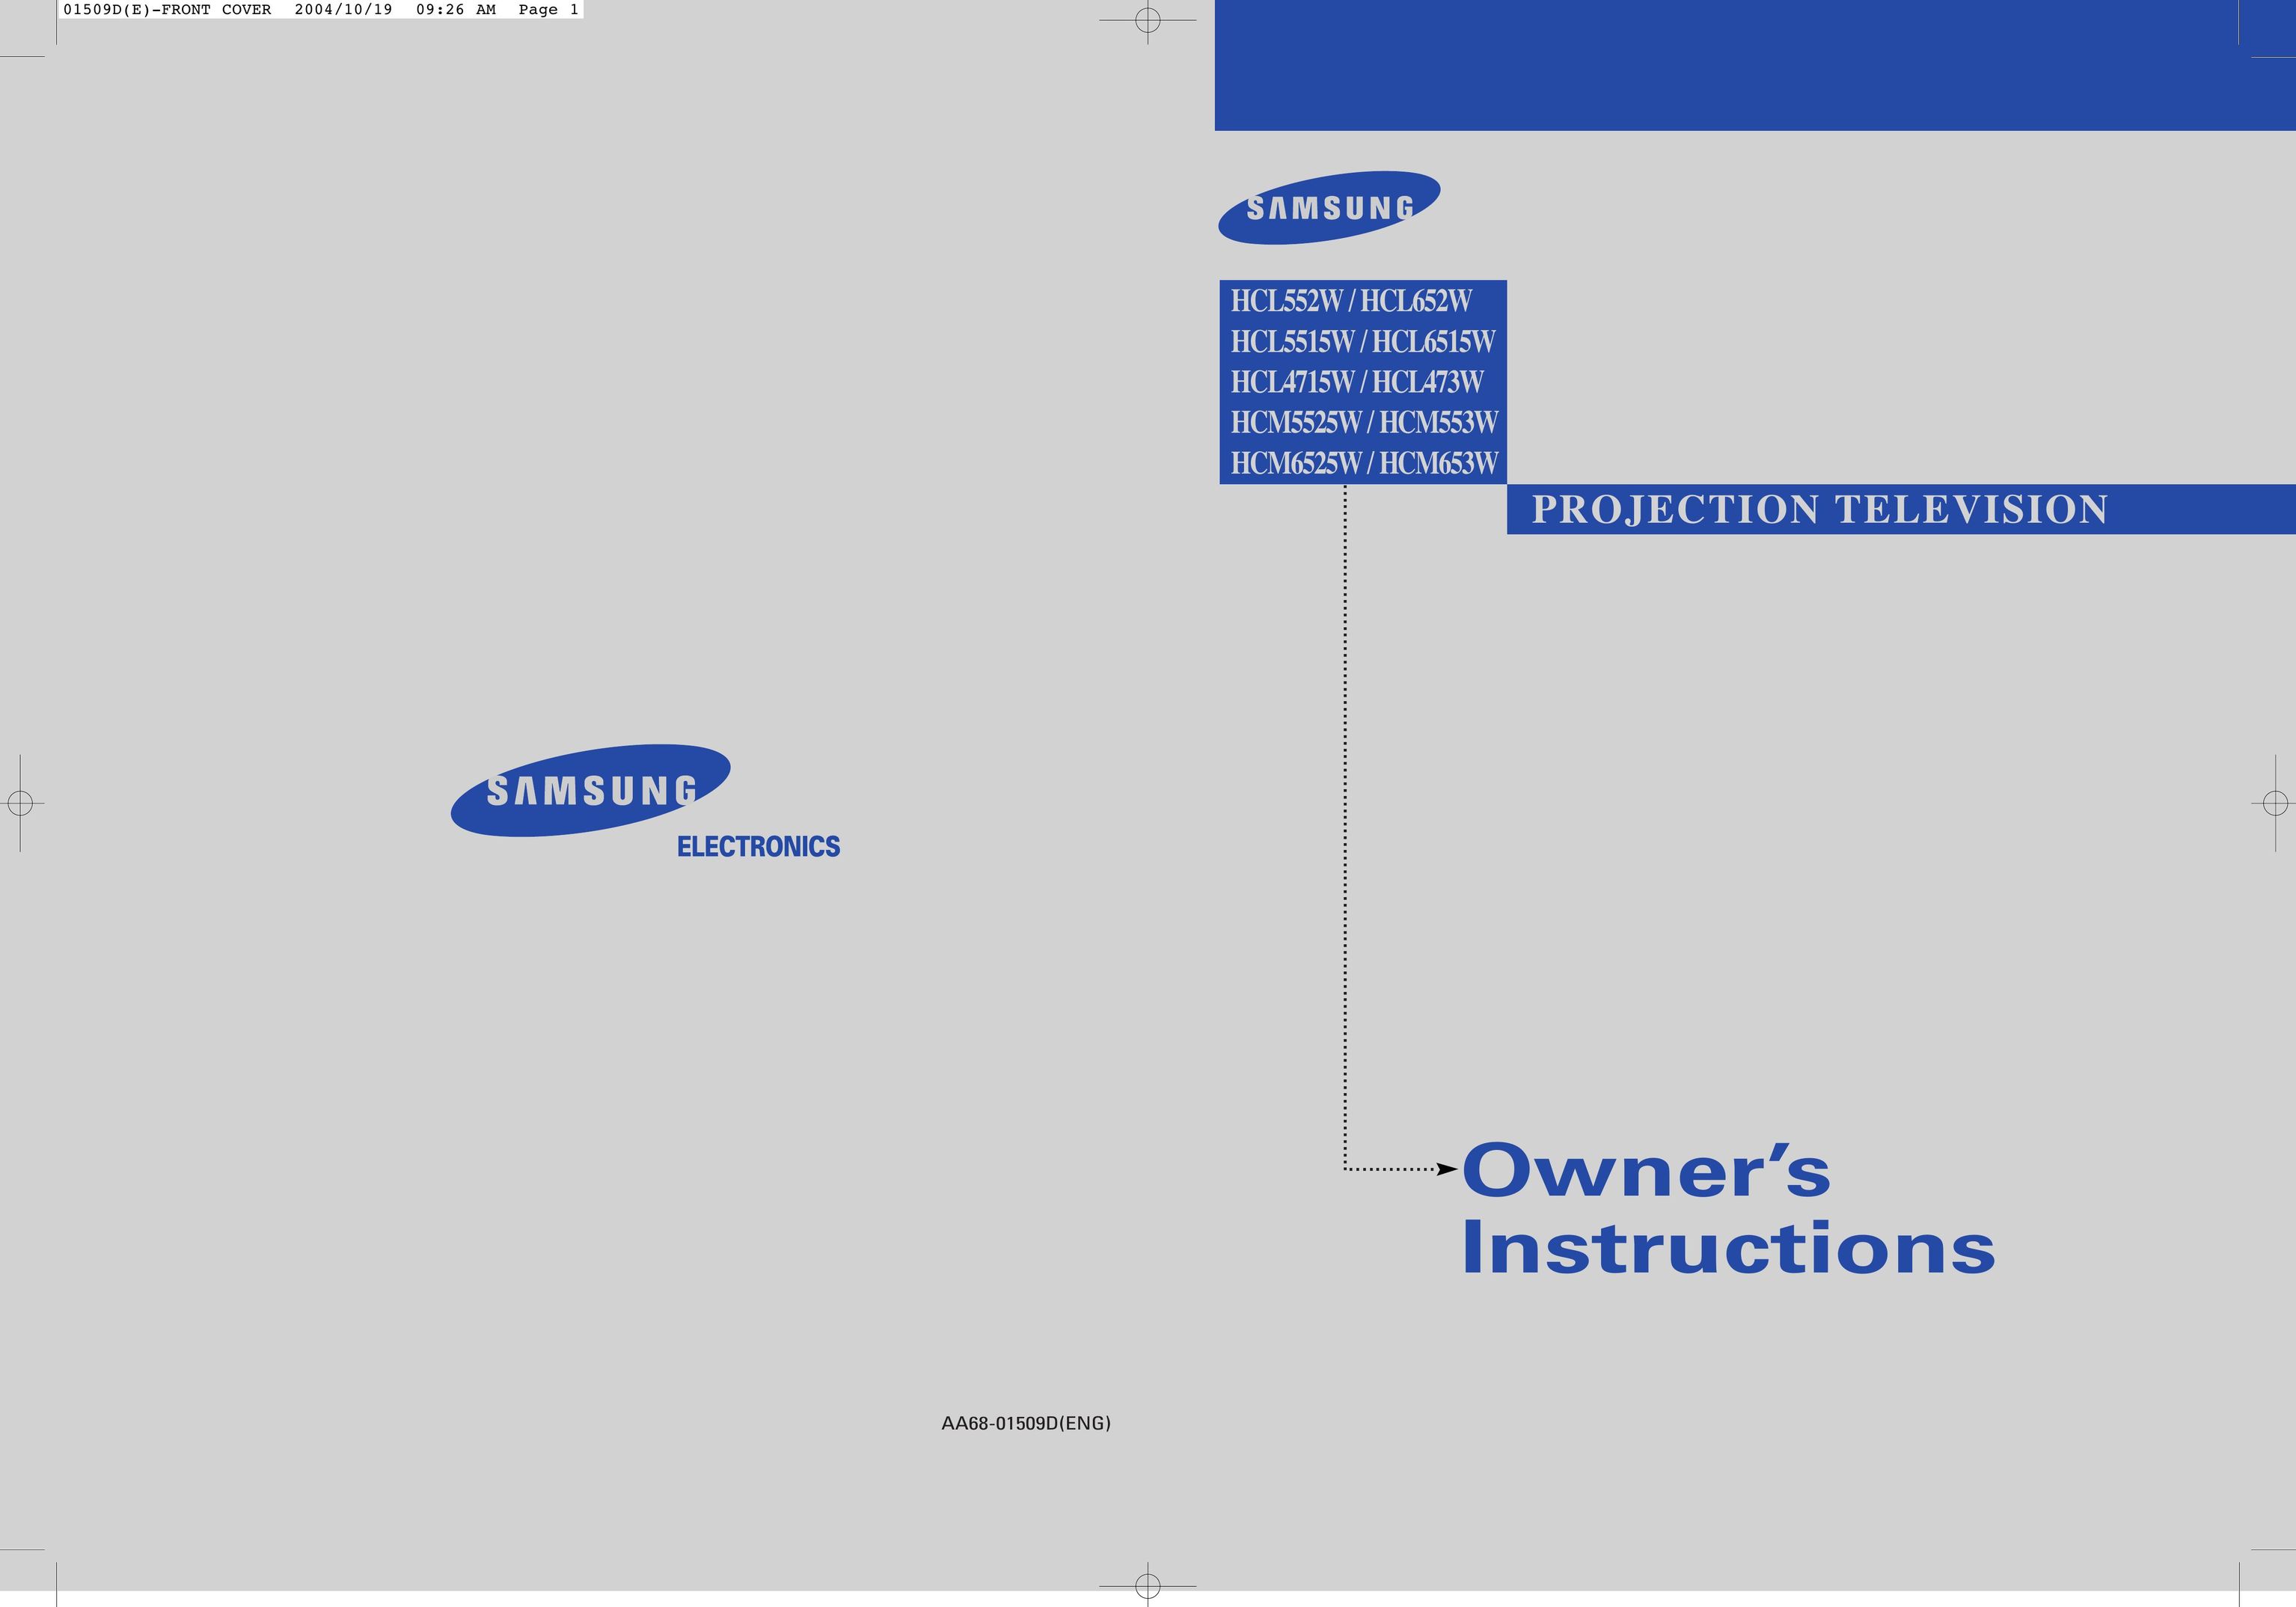 Samsung HCM 553W Projection Television User Manual